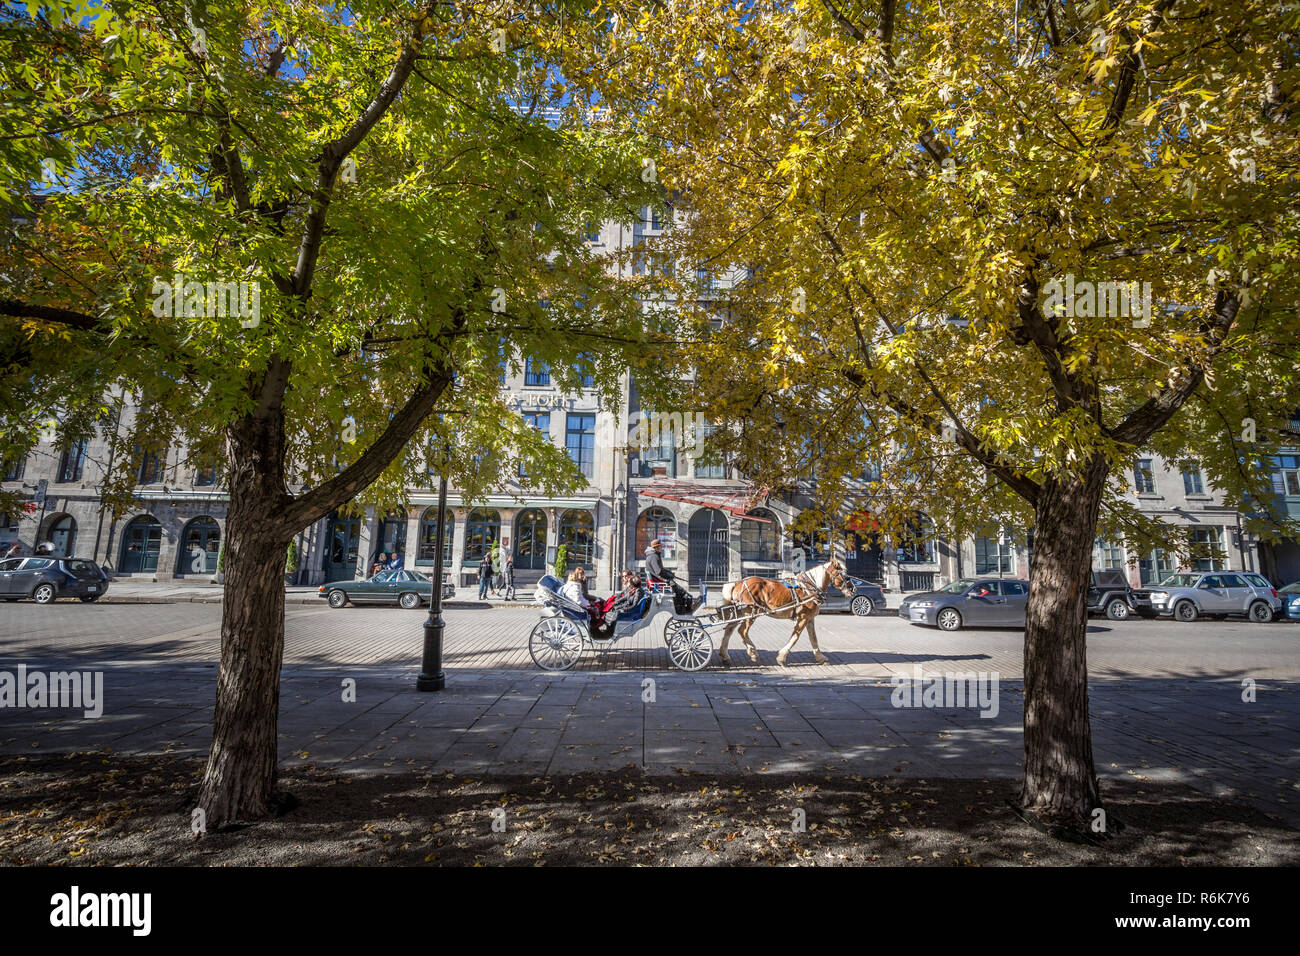 MONTREAL, CANADA - NOVEMBER 4, 2018: Horse Drawn Cart Buggy carrying tourists passing by Rue de la Commune street in Old Montreal seafront, or Vieux M Stock Photo